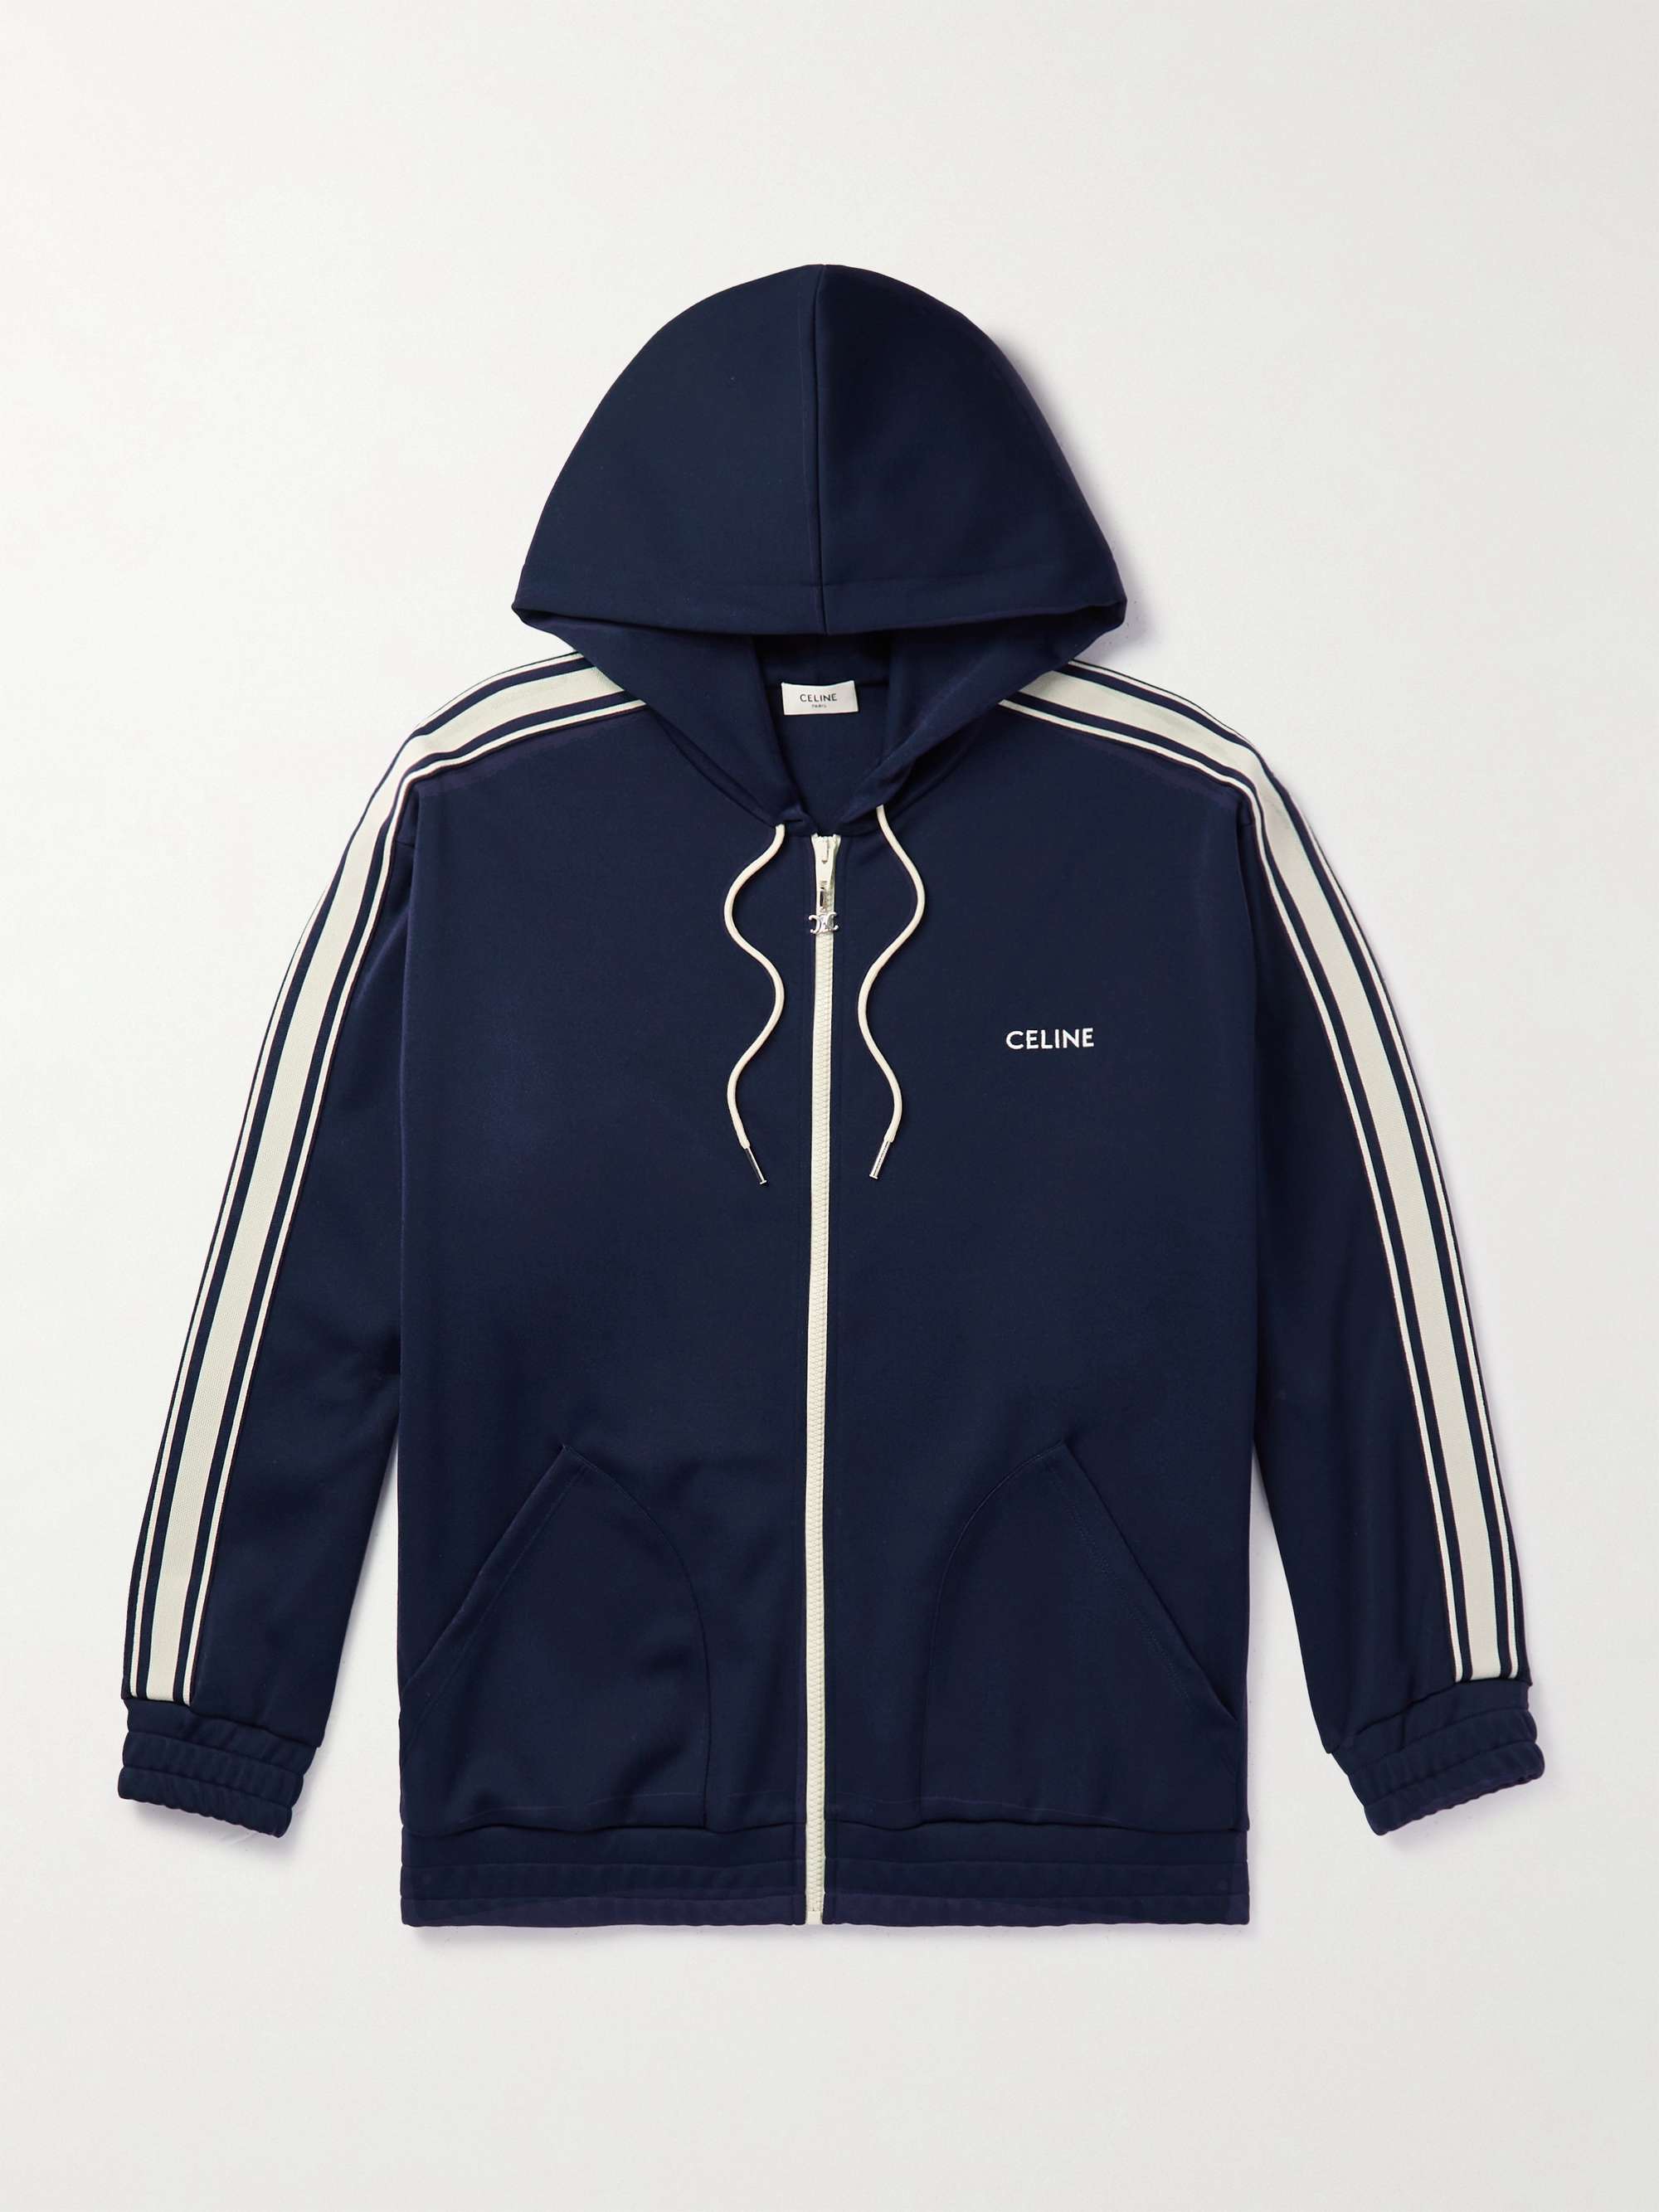 CELINE HOMME Logo-Embroidered Striped Jersey Zip-Up Hoodie